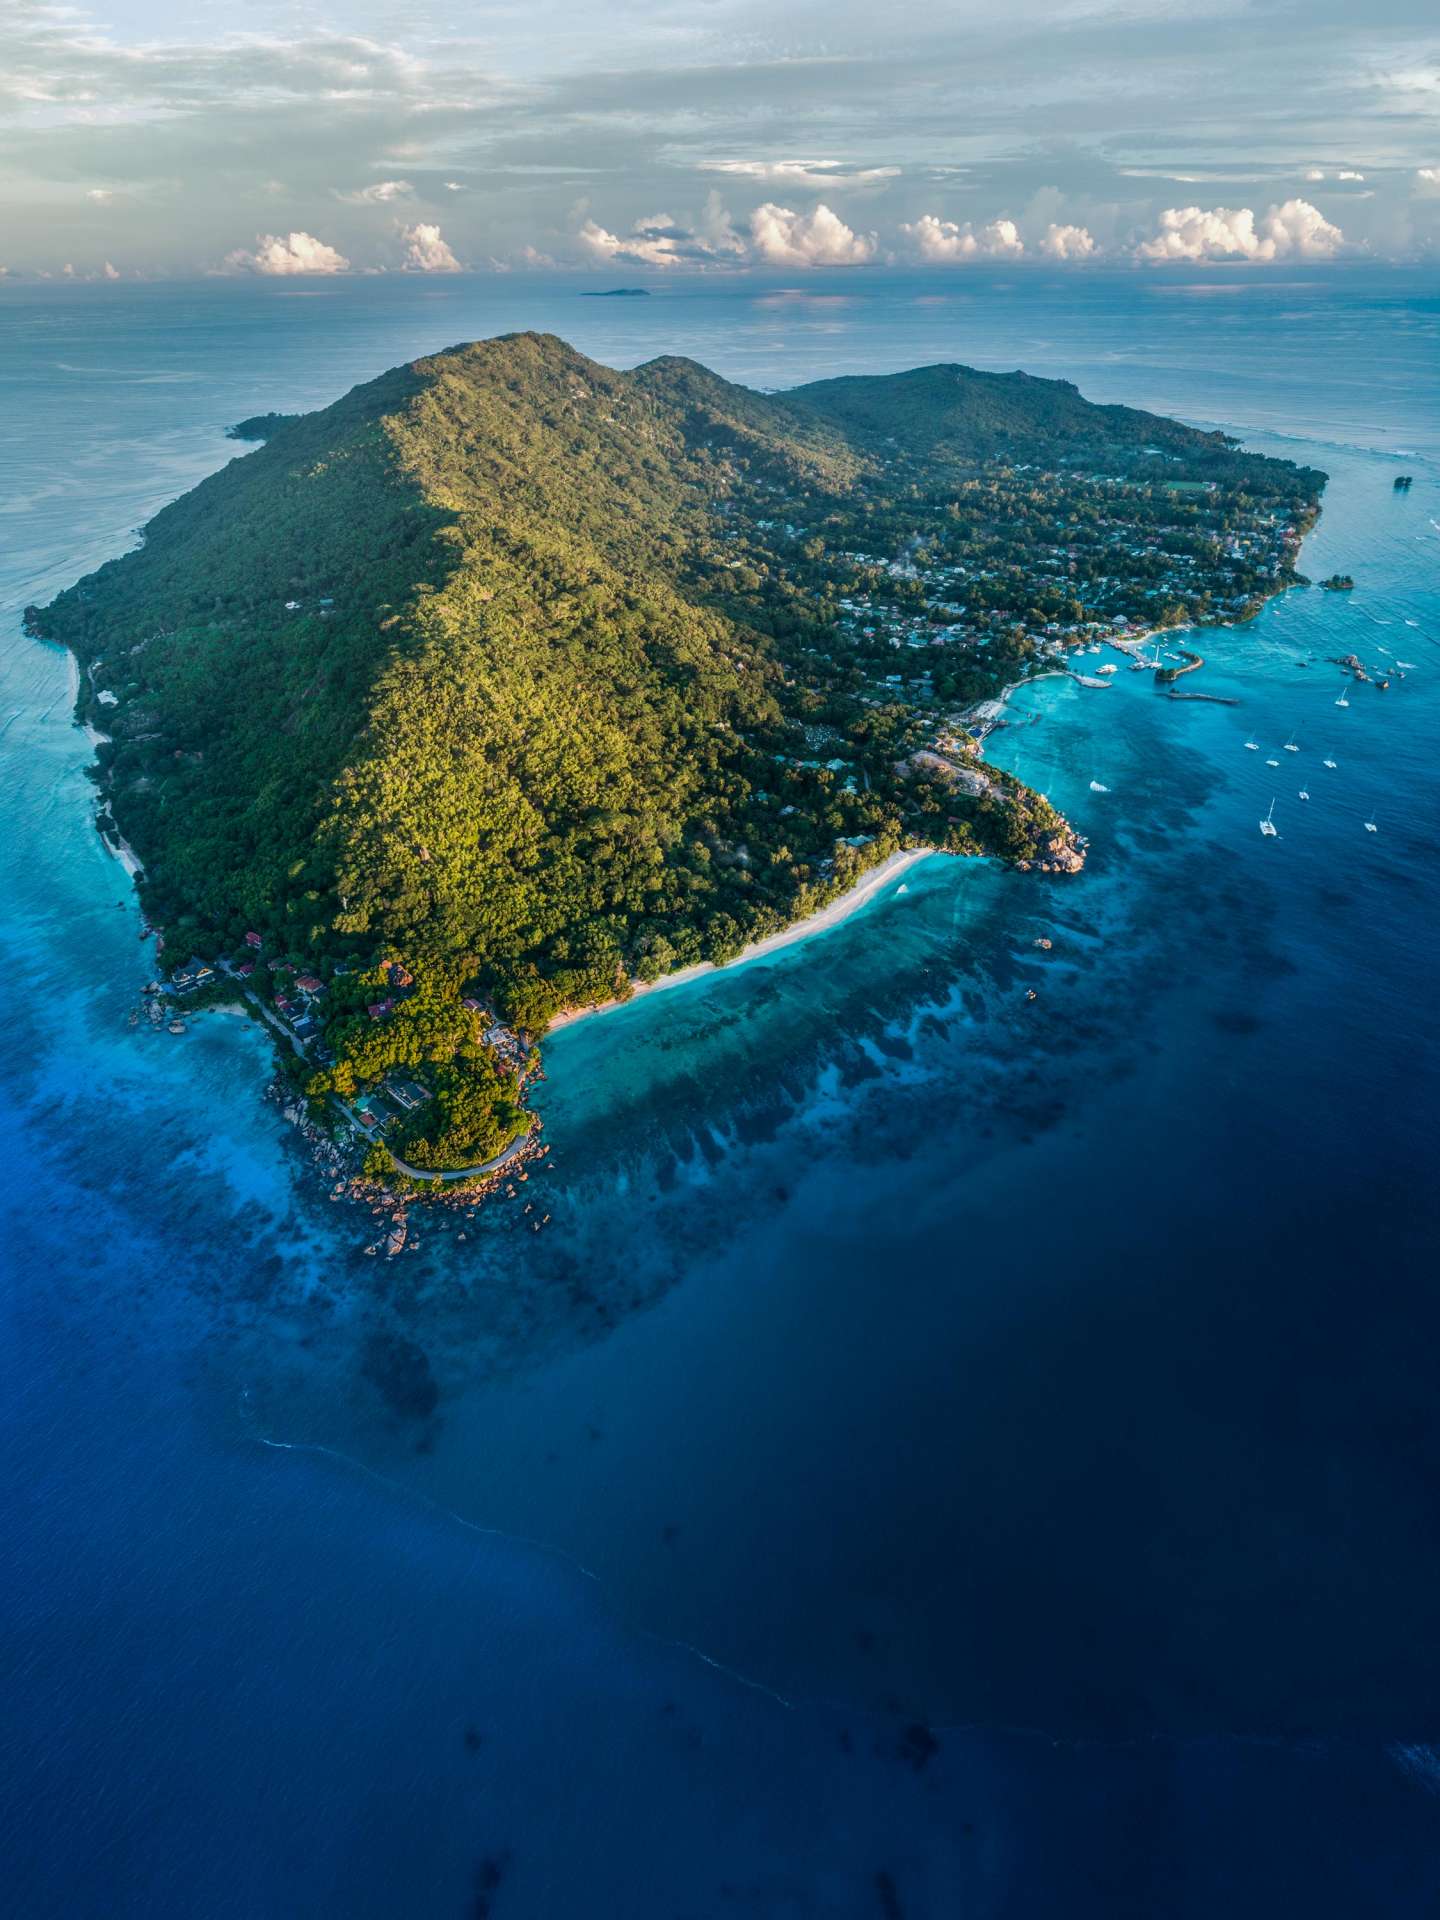 Seychelles La Digue Island drone aerial view enrico pescantini from